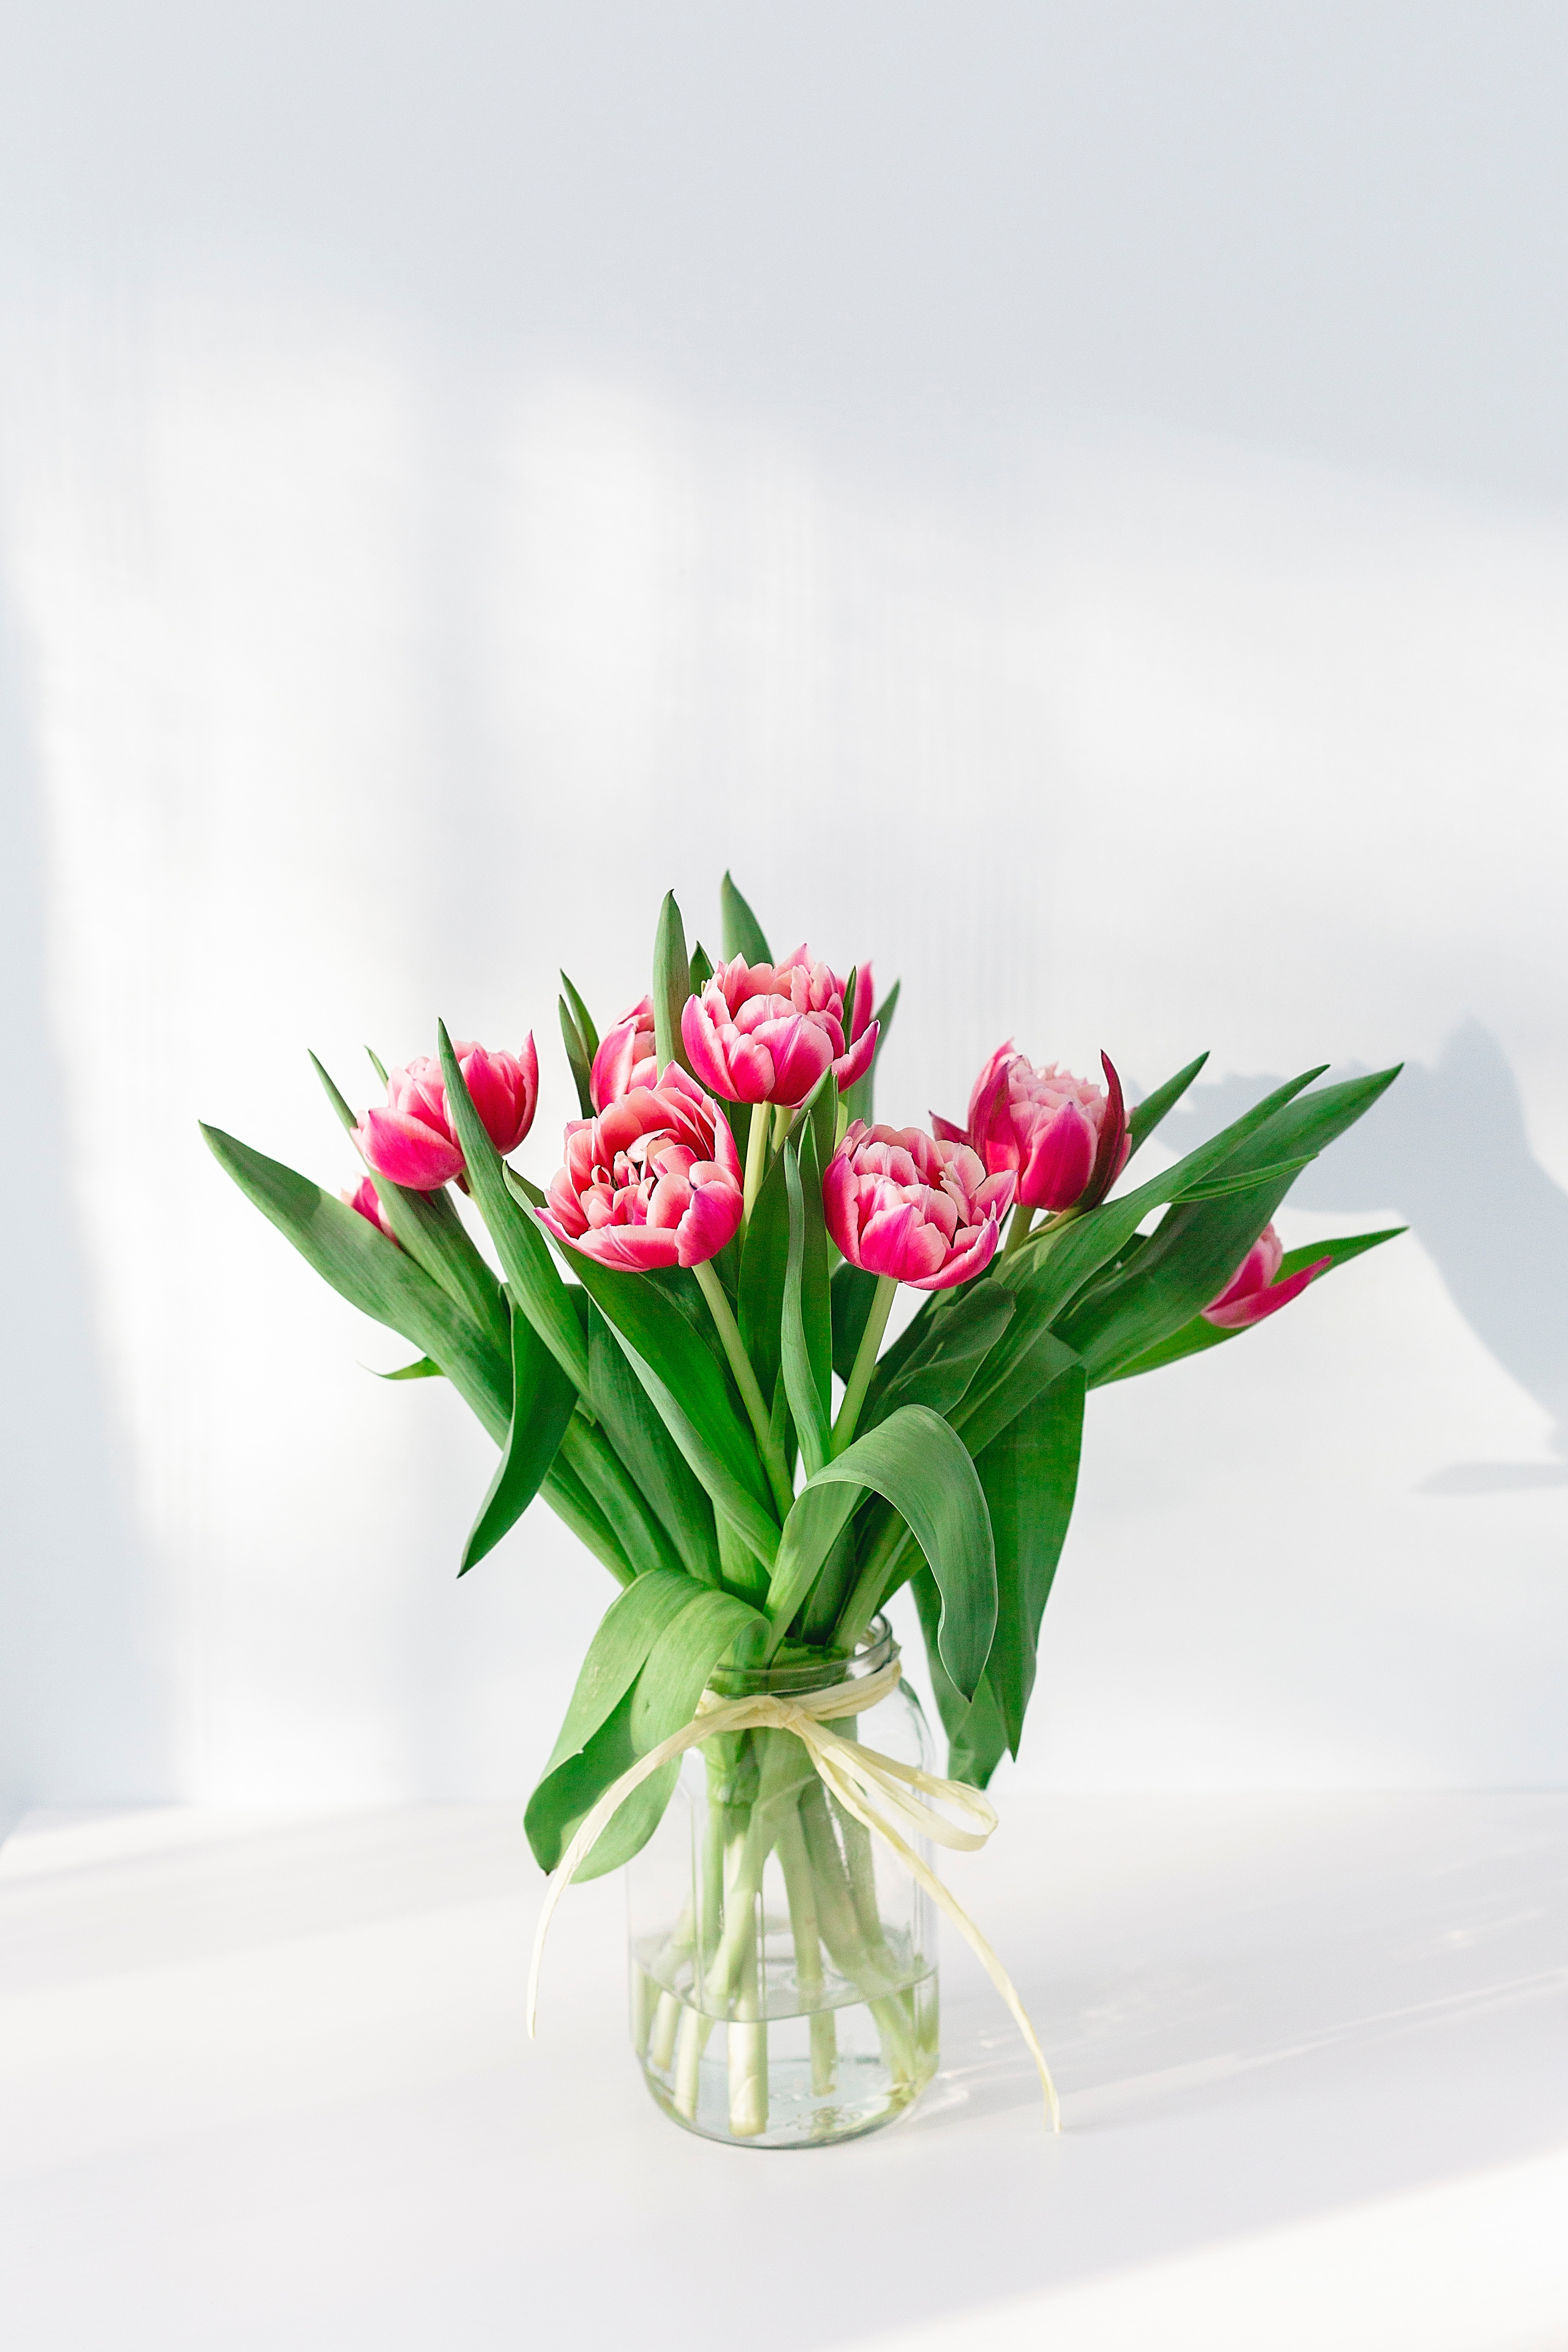 tulips, bouquet, flowers, pink, vase wallpaper for mobile